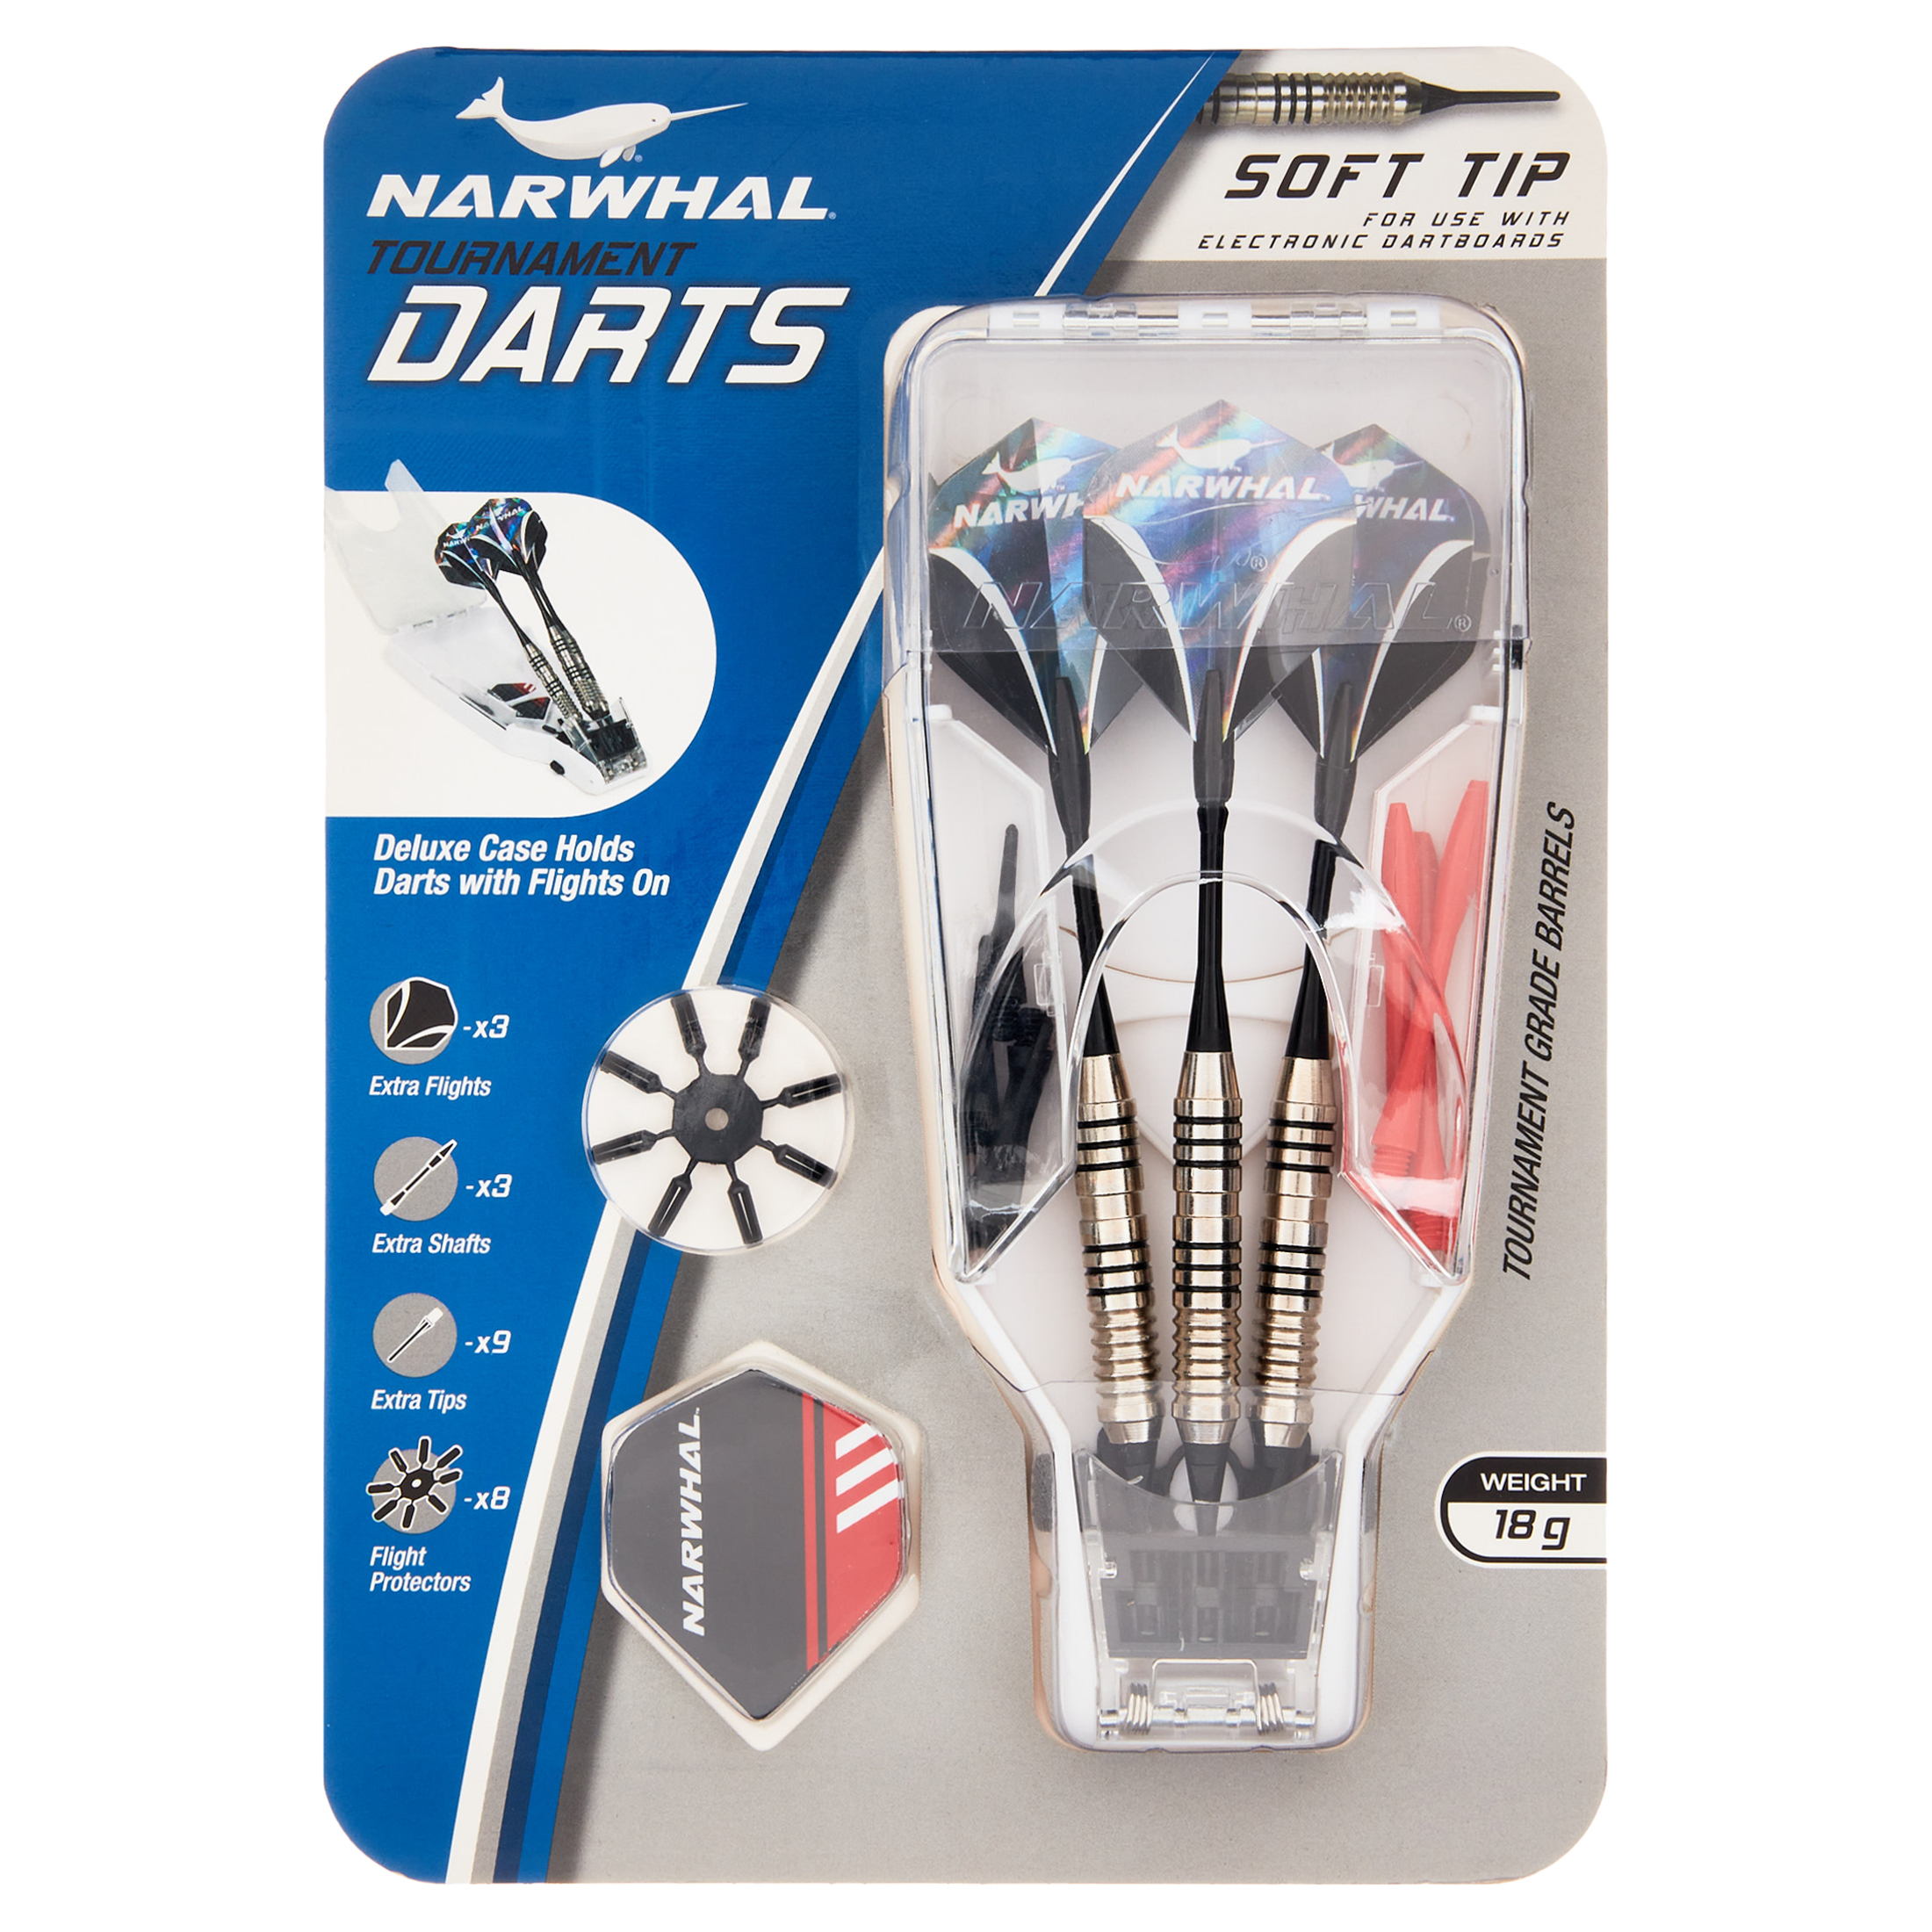 Narwhal Tournament Soft Tip Dart Set for Electronic Dartboards, 18g, 7 in. - 3 Pack with Carry Case - image 2 of 15